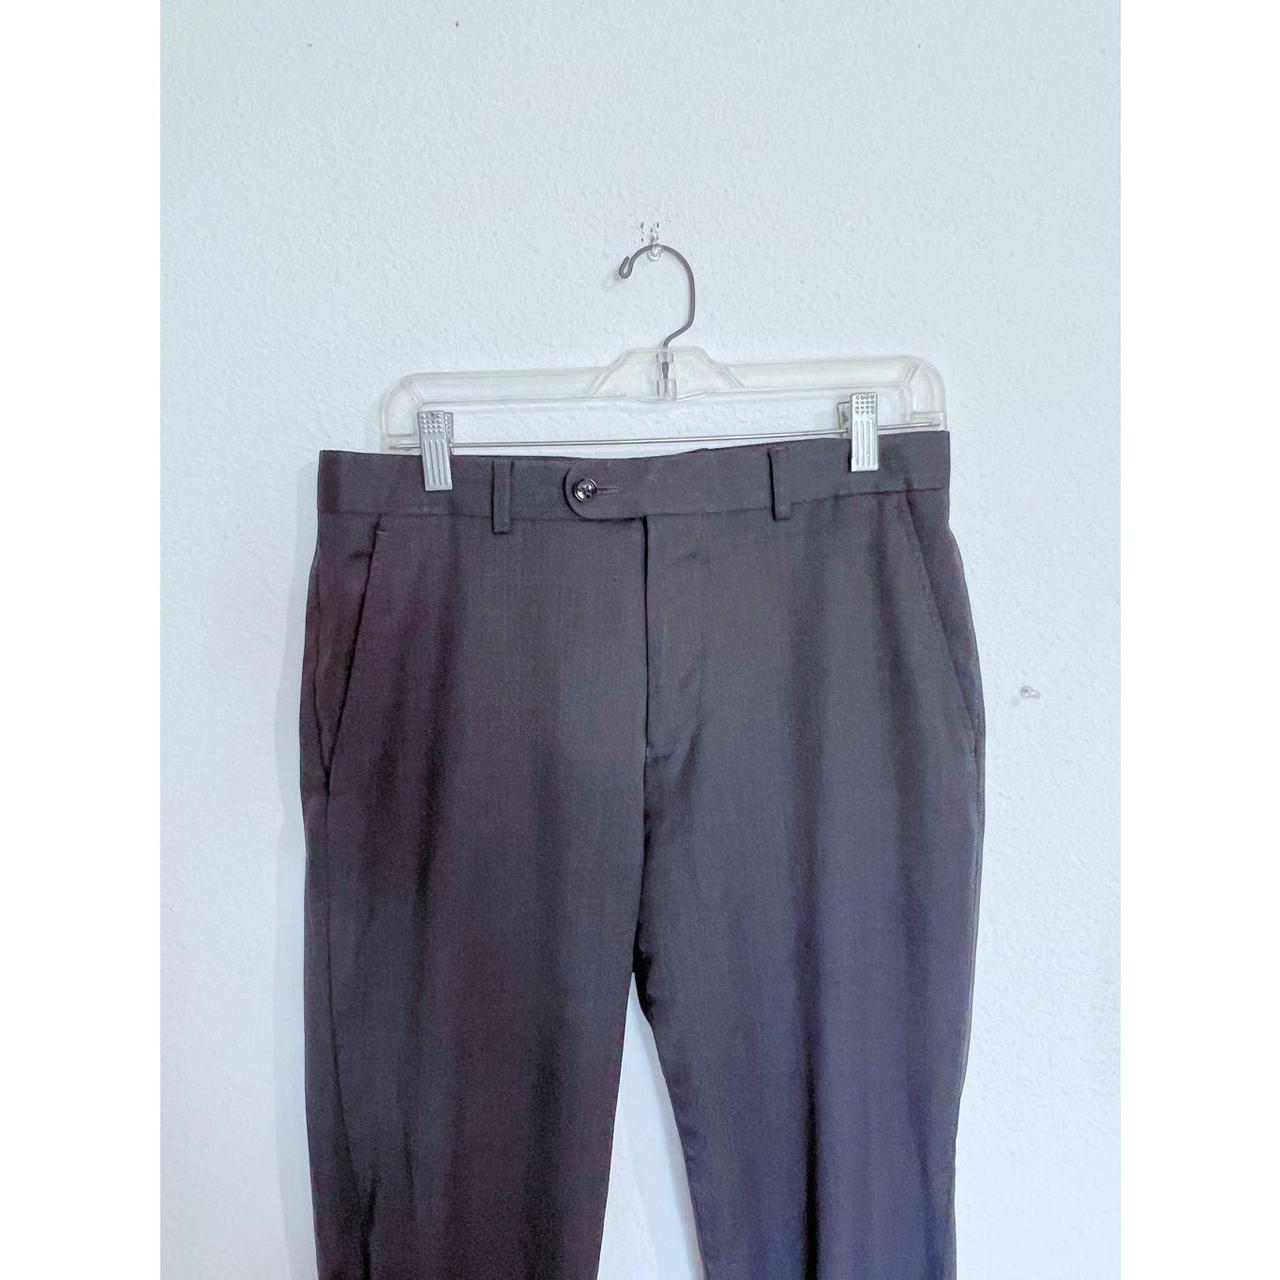 Product Image 2 - Perry Ellis Charcoal Grey Pleated